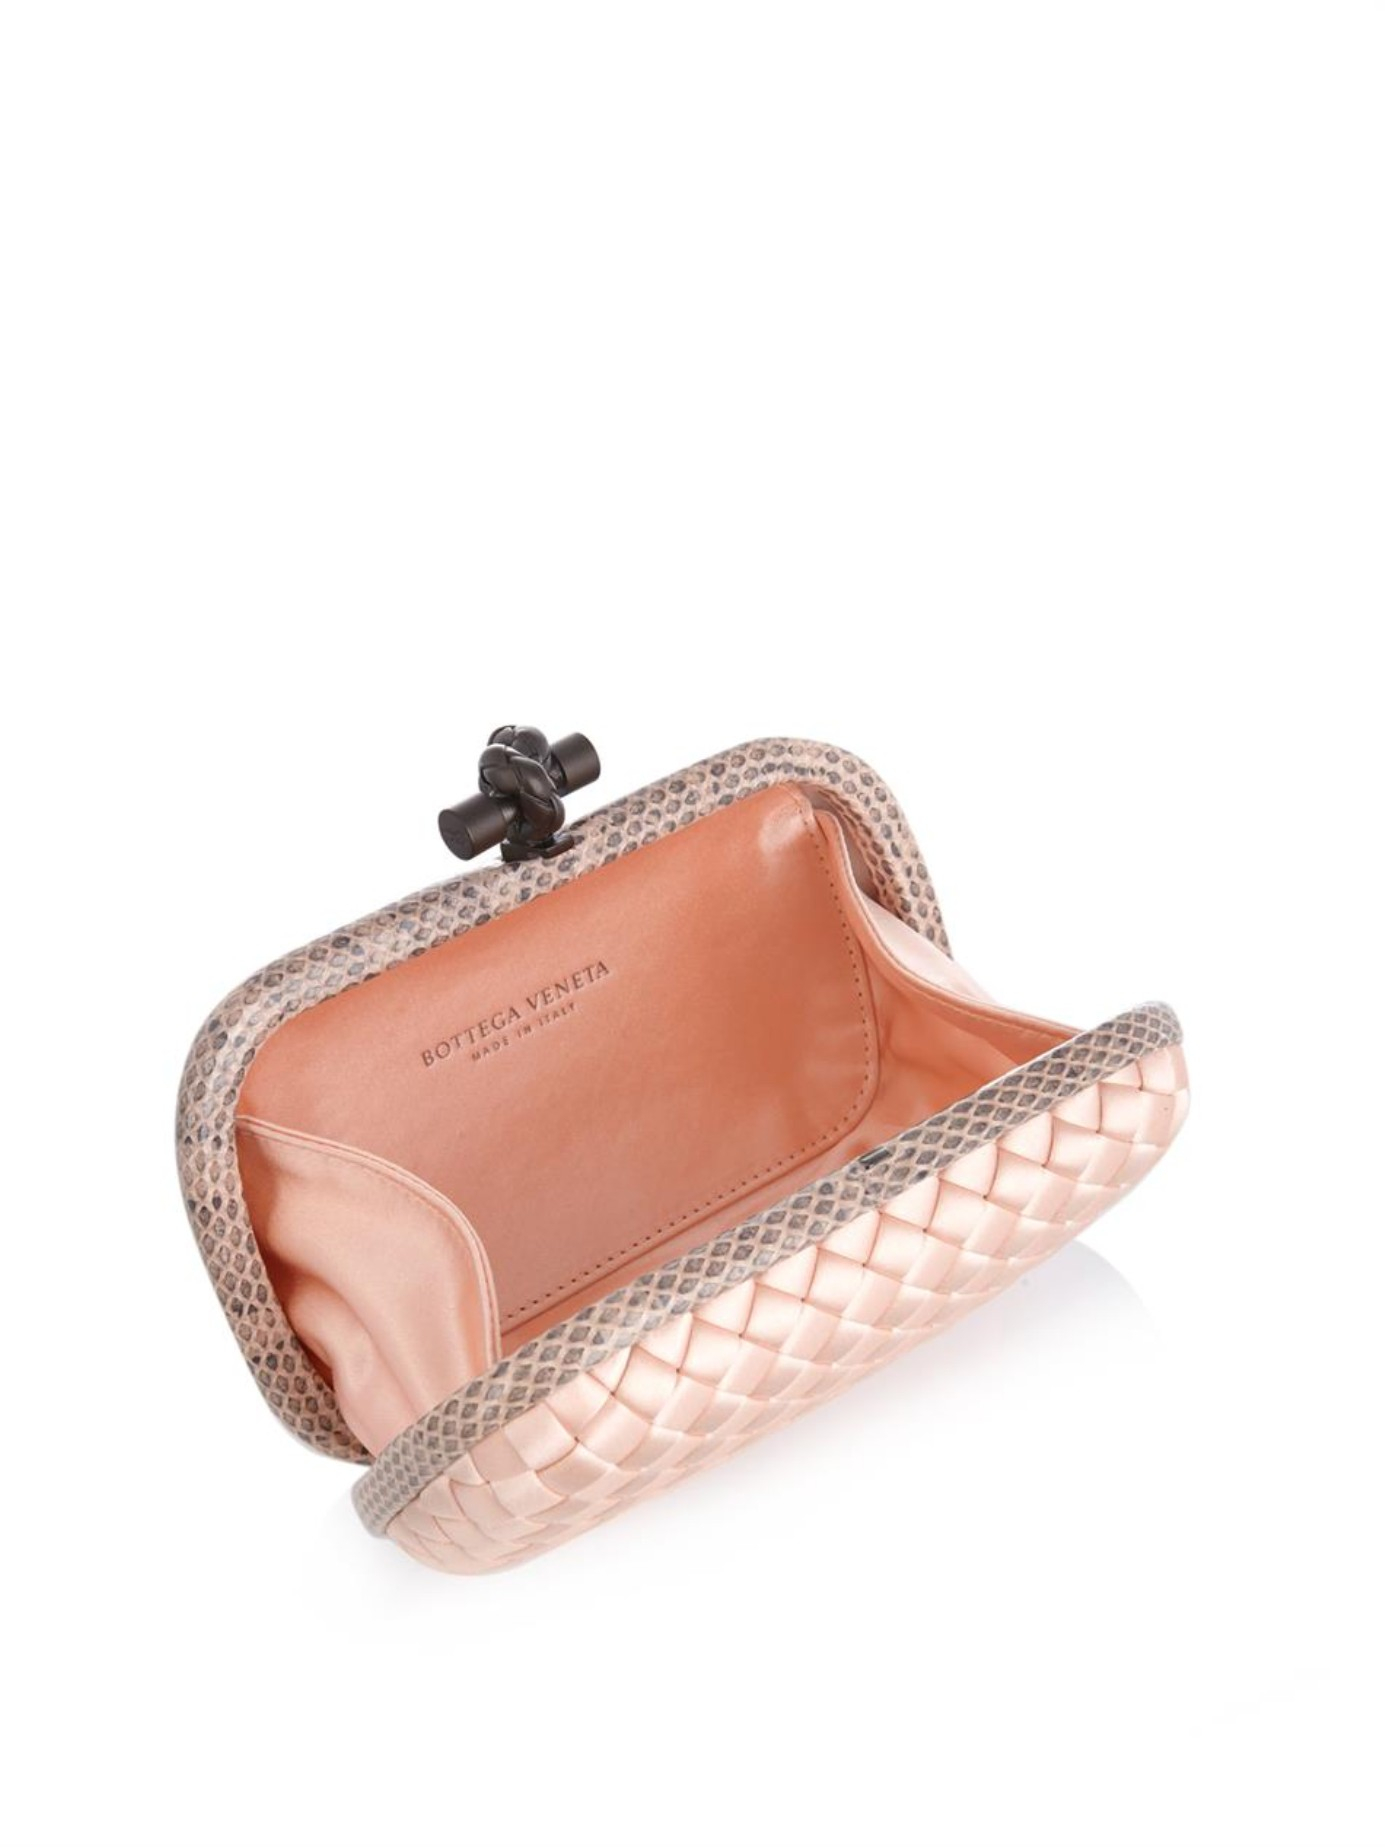 bottega veneta knot clutch Archives - Page 23 of 29 - High Heel Confidential